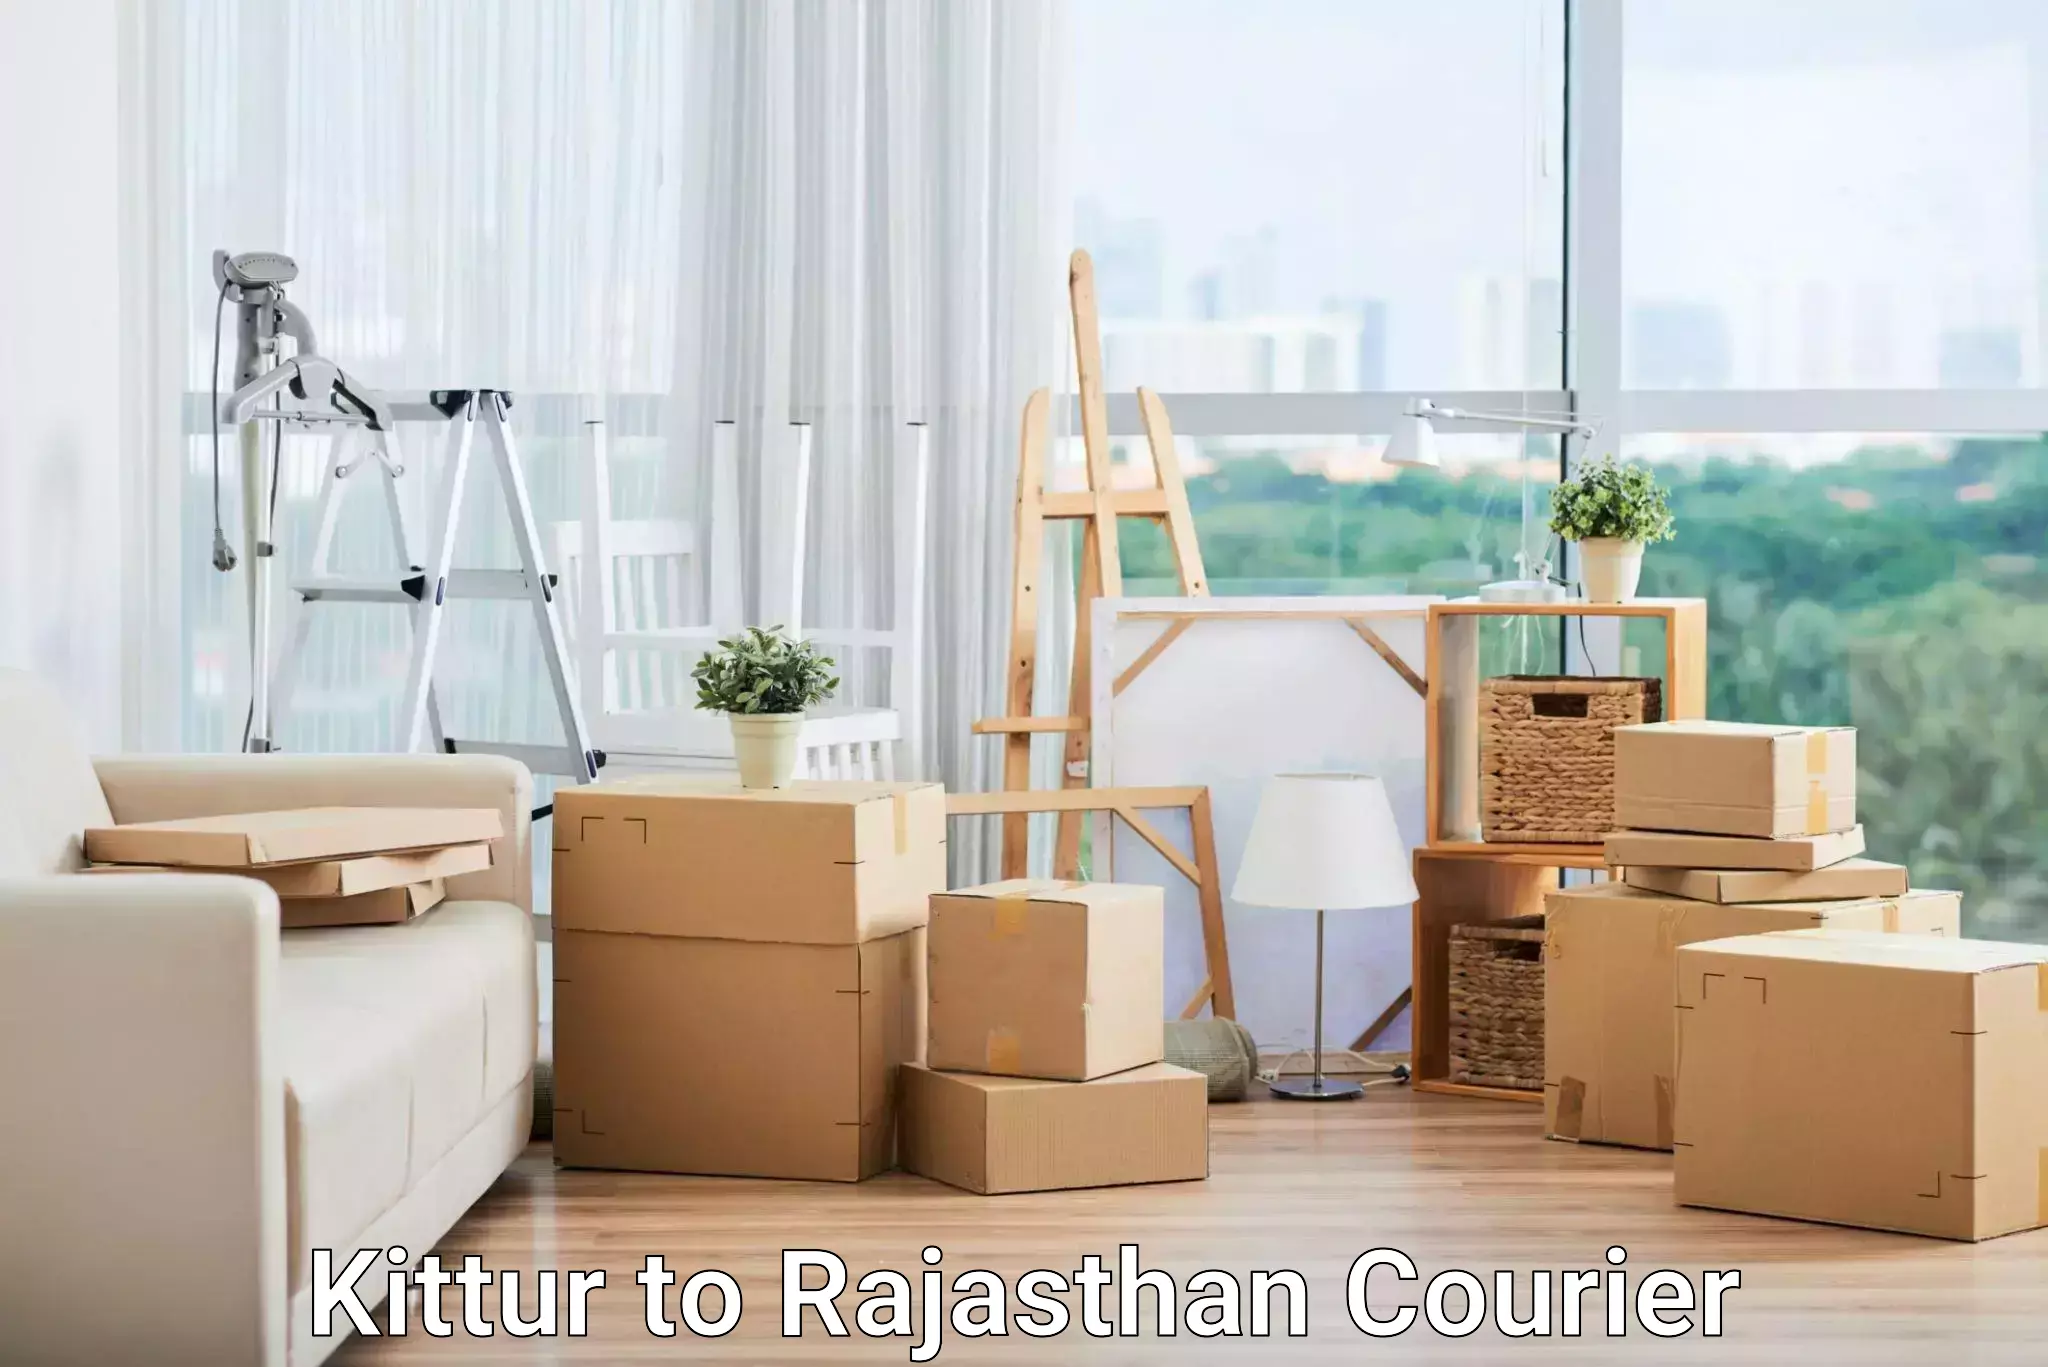 On-call courier service Kittur to Udaipur